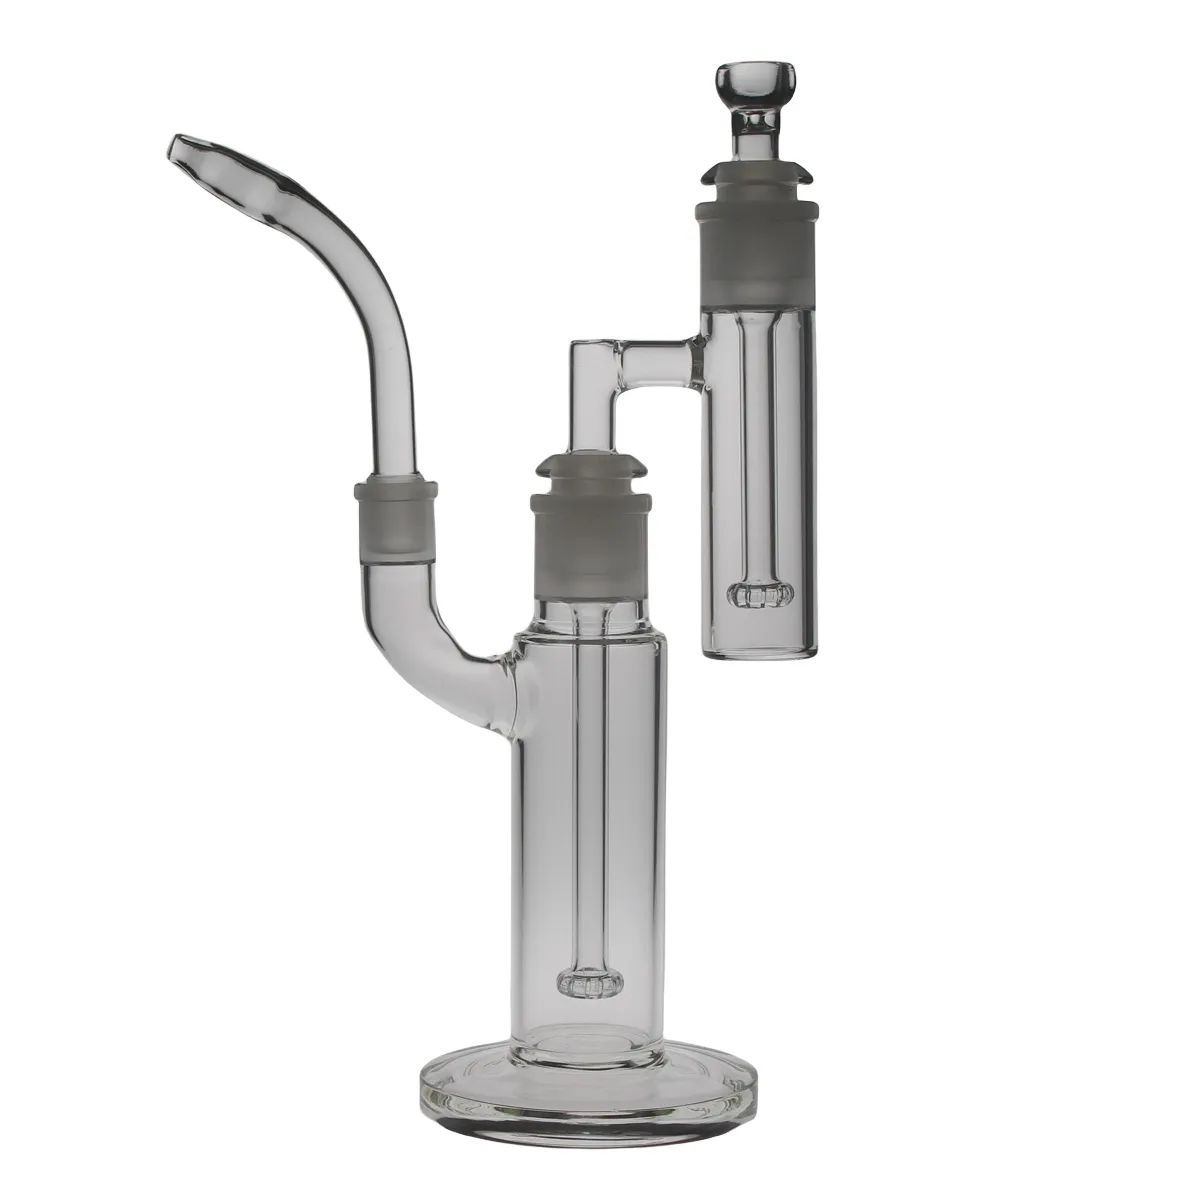 SAML GLASS 35cm Height Glass Bong Diffusion Smoking Water Pipe Added Tall With Ash Catcher Dab Rig Vapor Joint size 18.8mm PG3057Improved FC-MOD